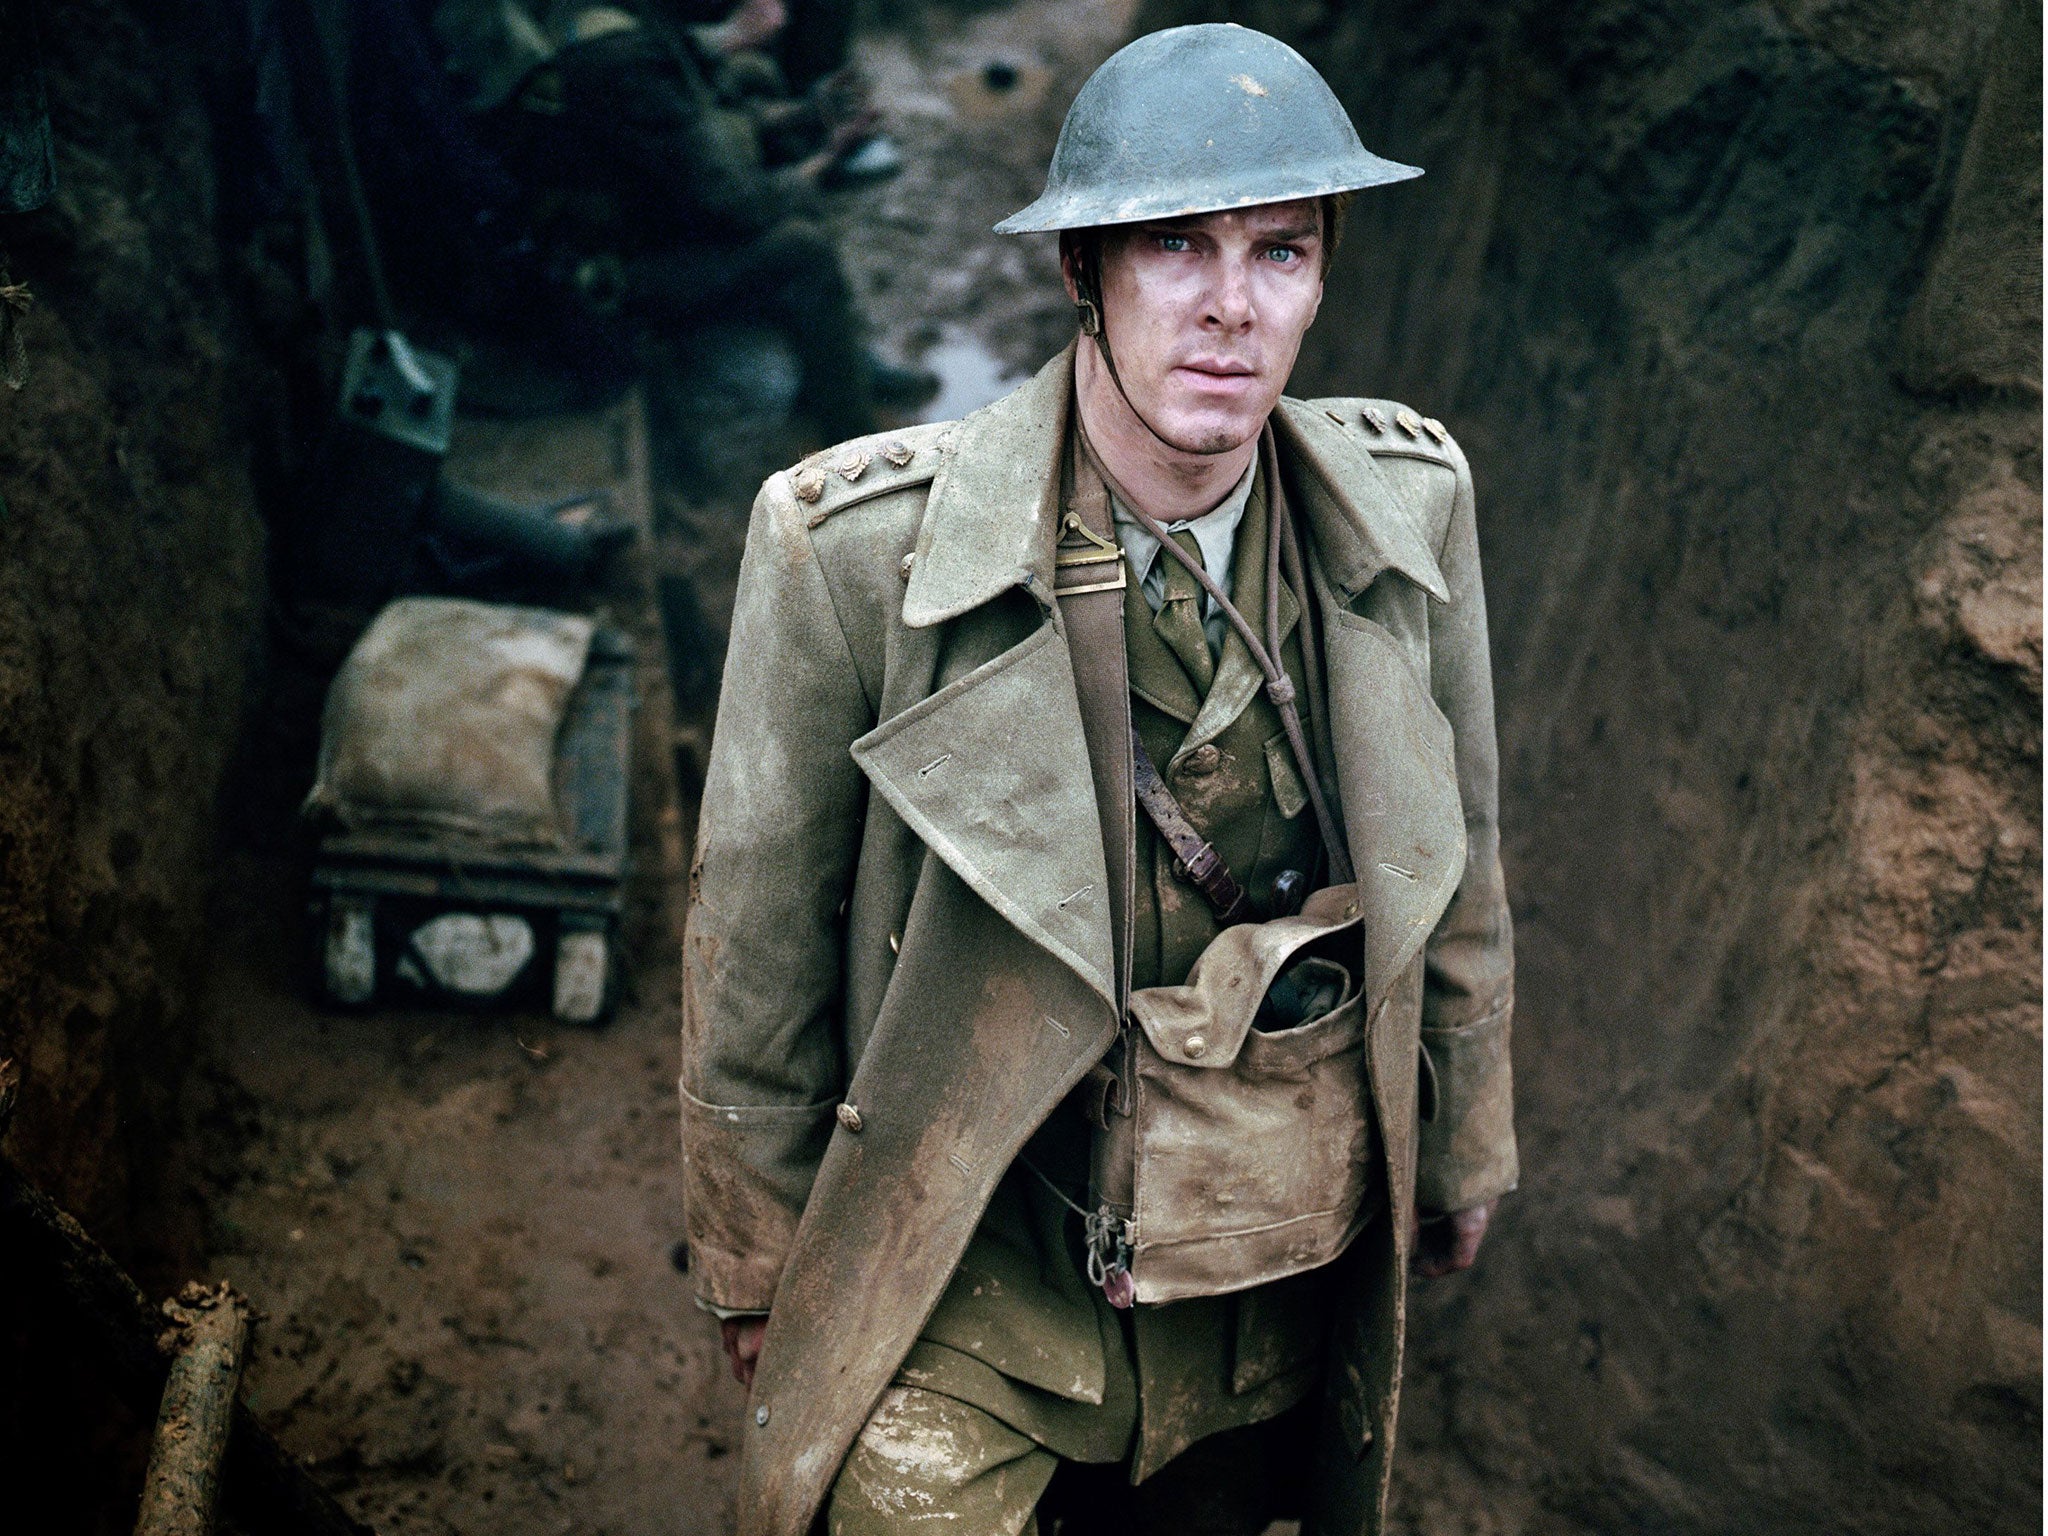 Benedict Cumberbatch as the idealistic Christopher Tietjens in 2012's Parade's End